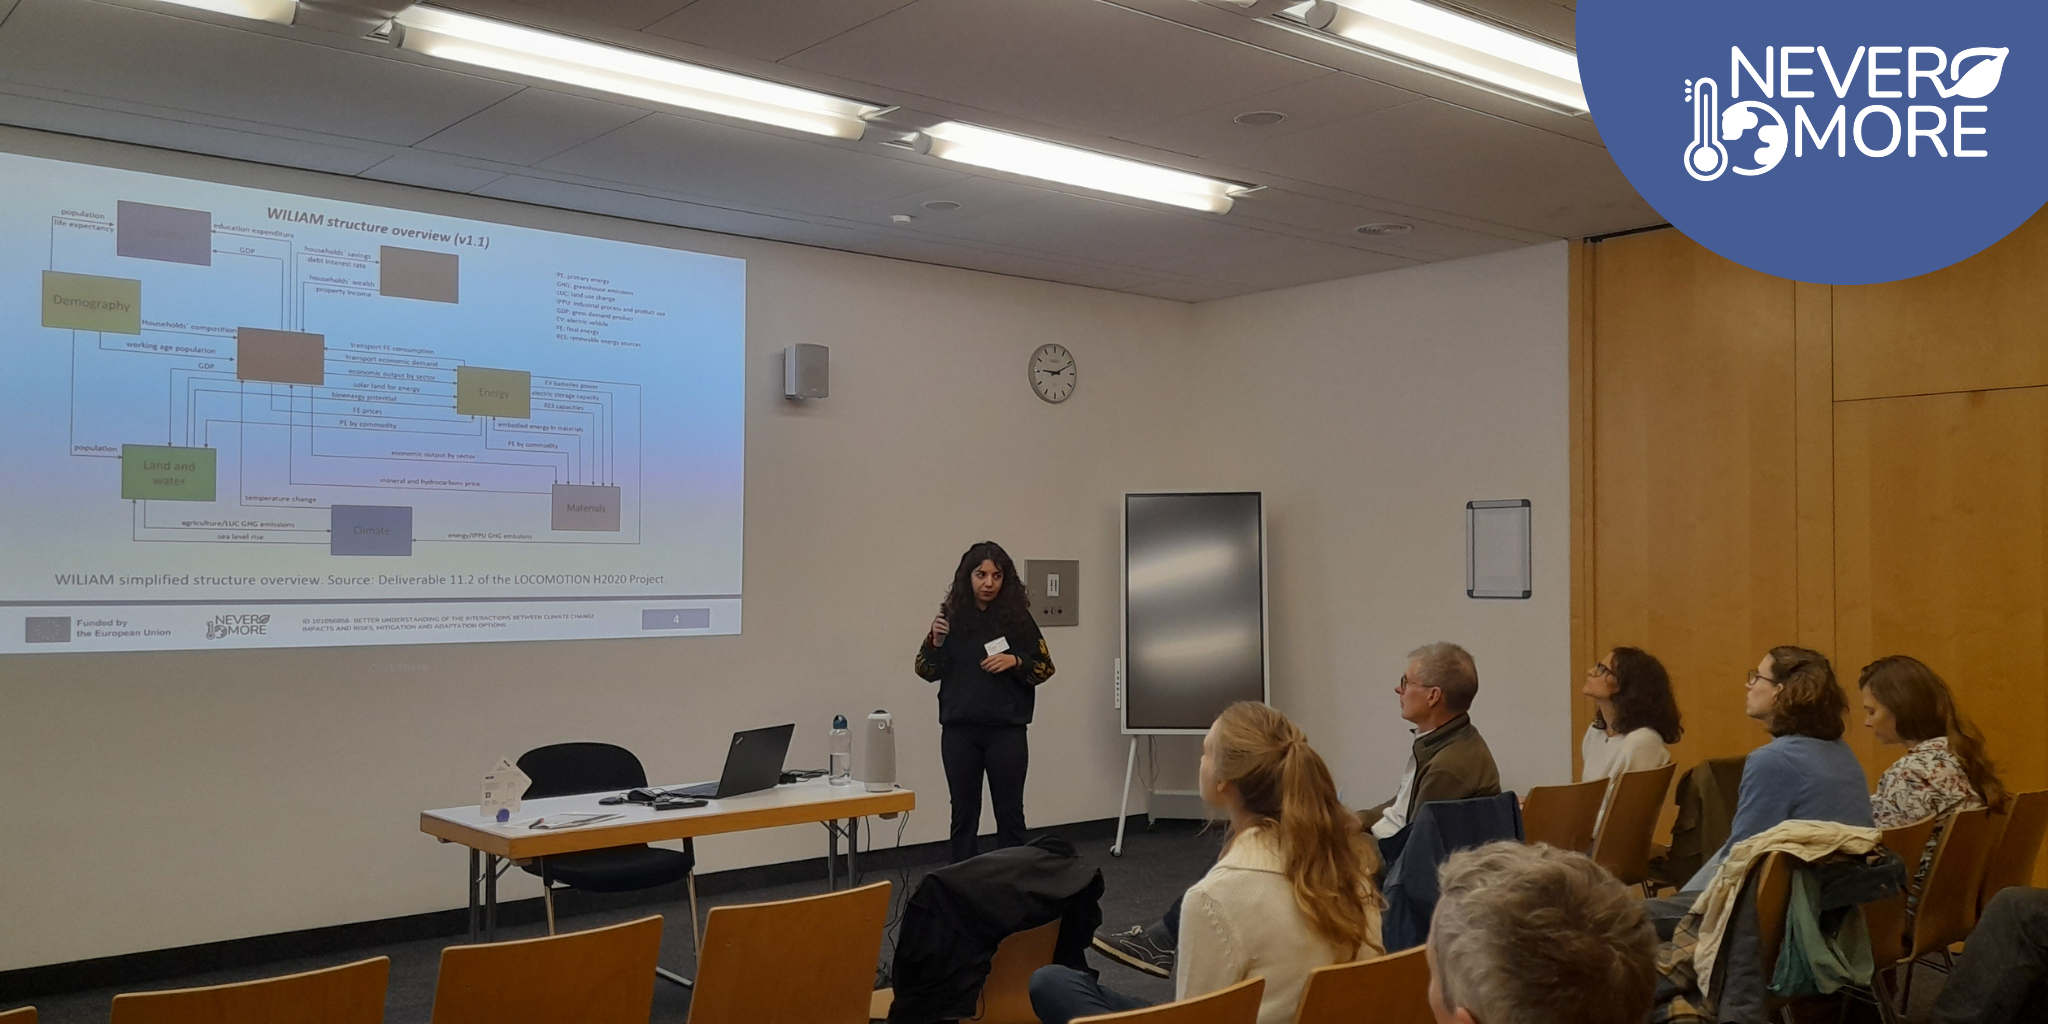 The NEVERMORE project takes a prominent role in presenting its research at the Cross-Border Climate Impacts and Systemic Risks Conference in Potsdam, Germany